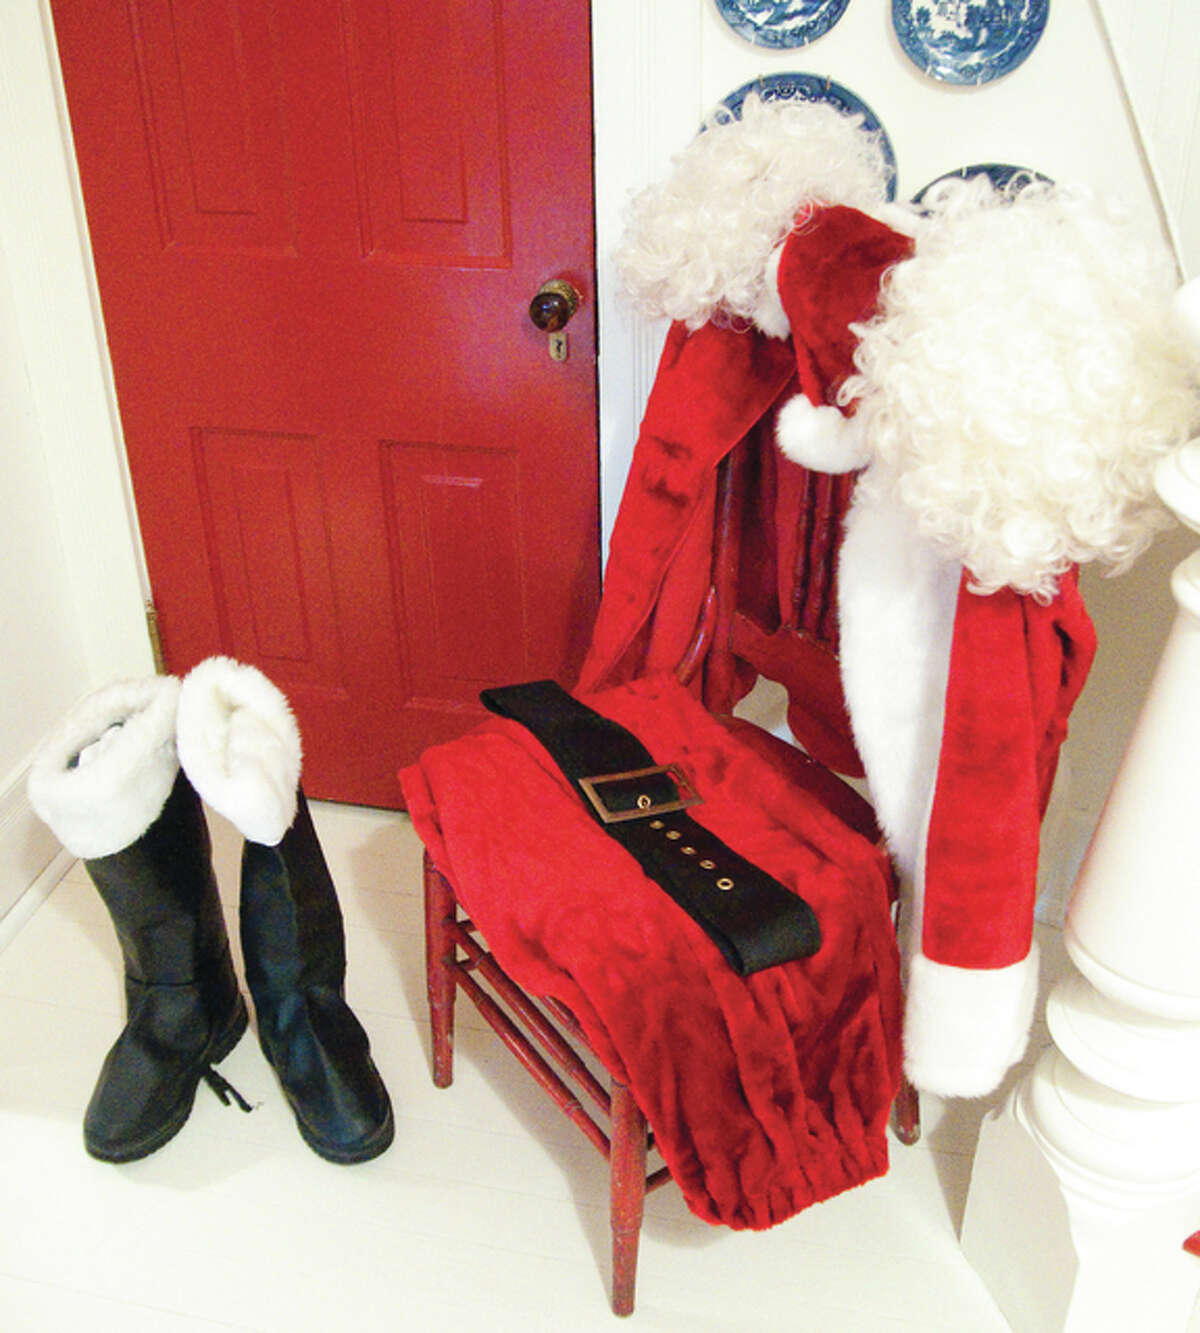 Cathy and Randy Marmino, whose 1881 historic farm house located at 705 S. Moreland Road, has been featured in a number of national magazines, had a Santa suit with boots on display which drew a lot of attention from those touring the home.